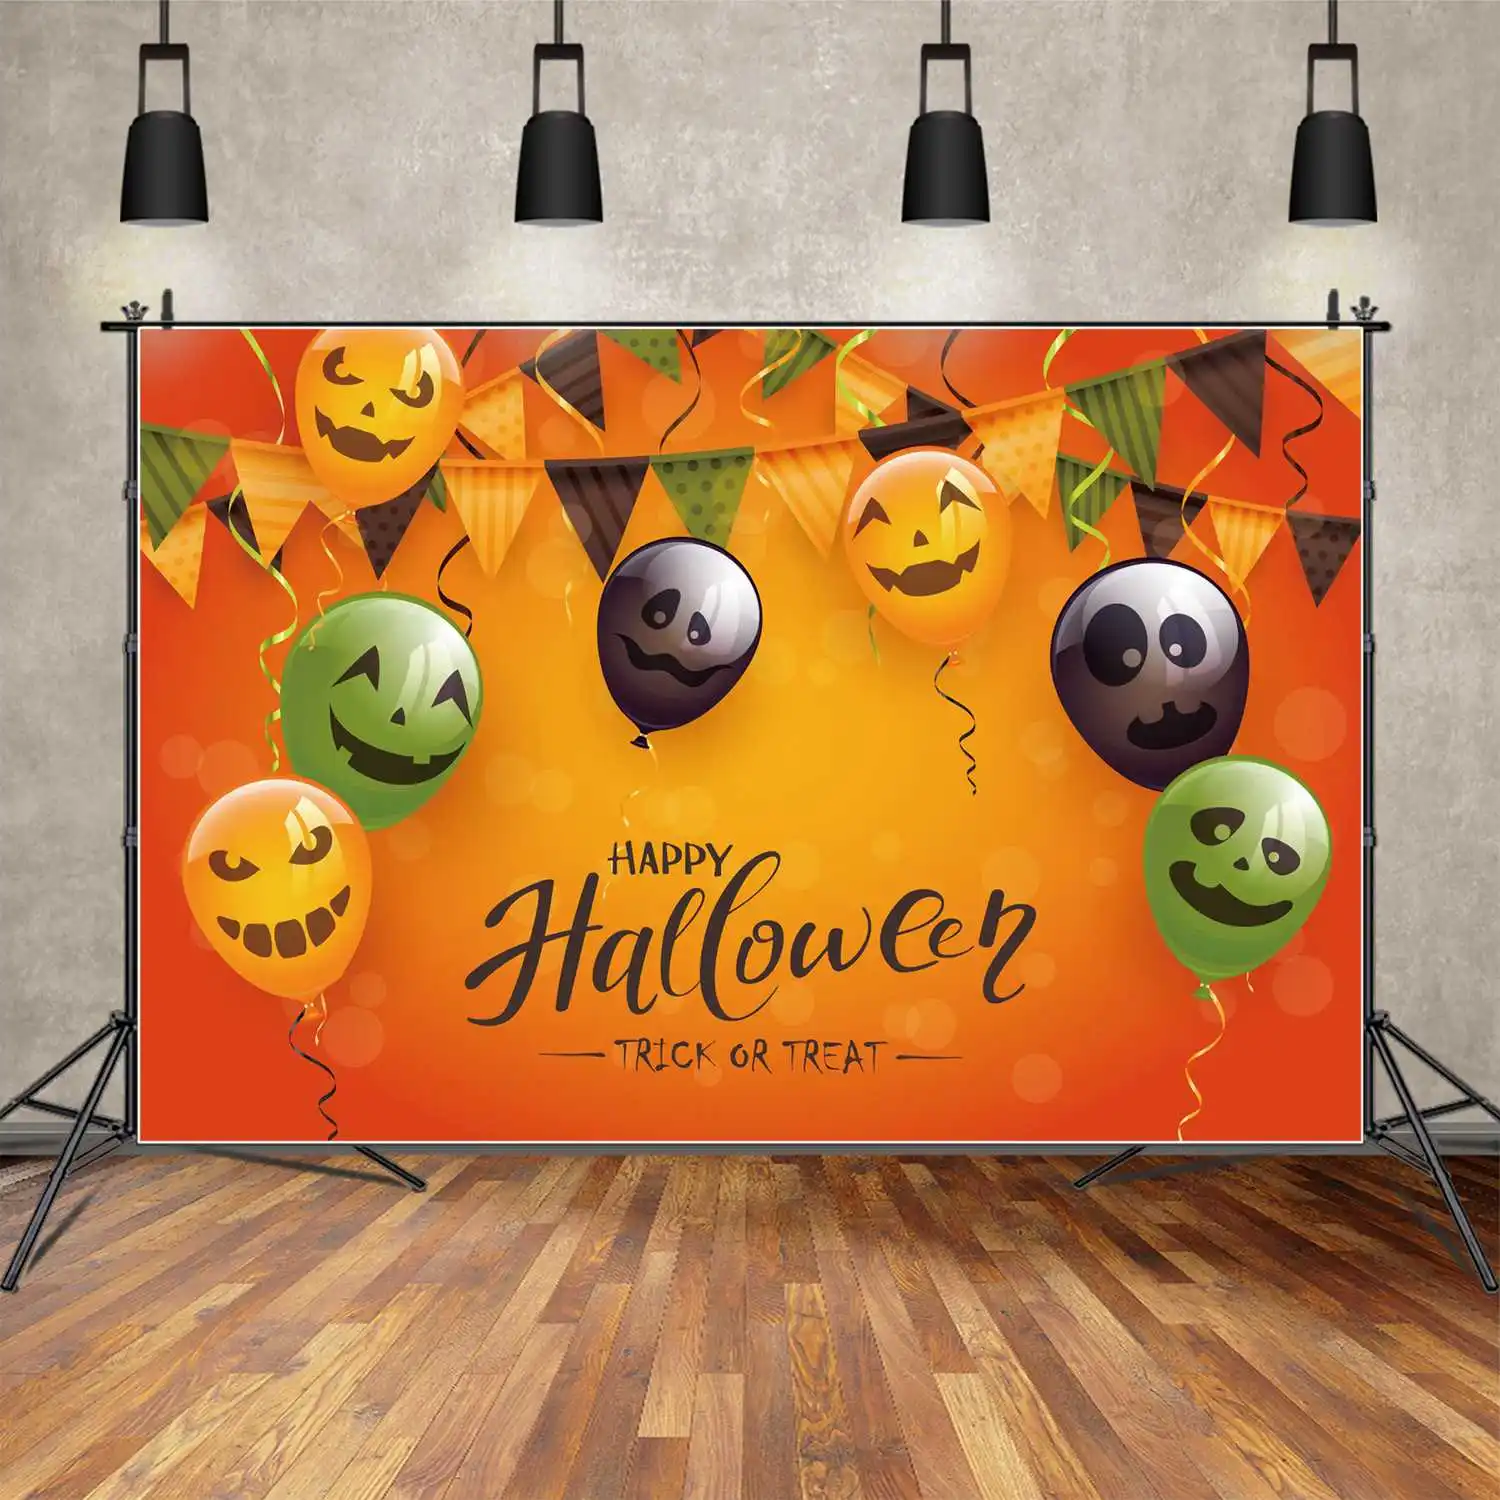 

MOON.QG Background Happy Halloween Party Banner Balloon Ribbon Flag Decor Backdrop Children's Trick Or Treat Photo Booth Props